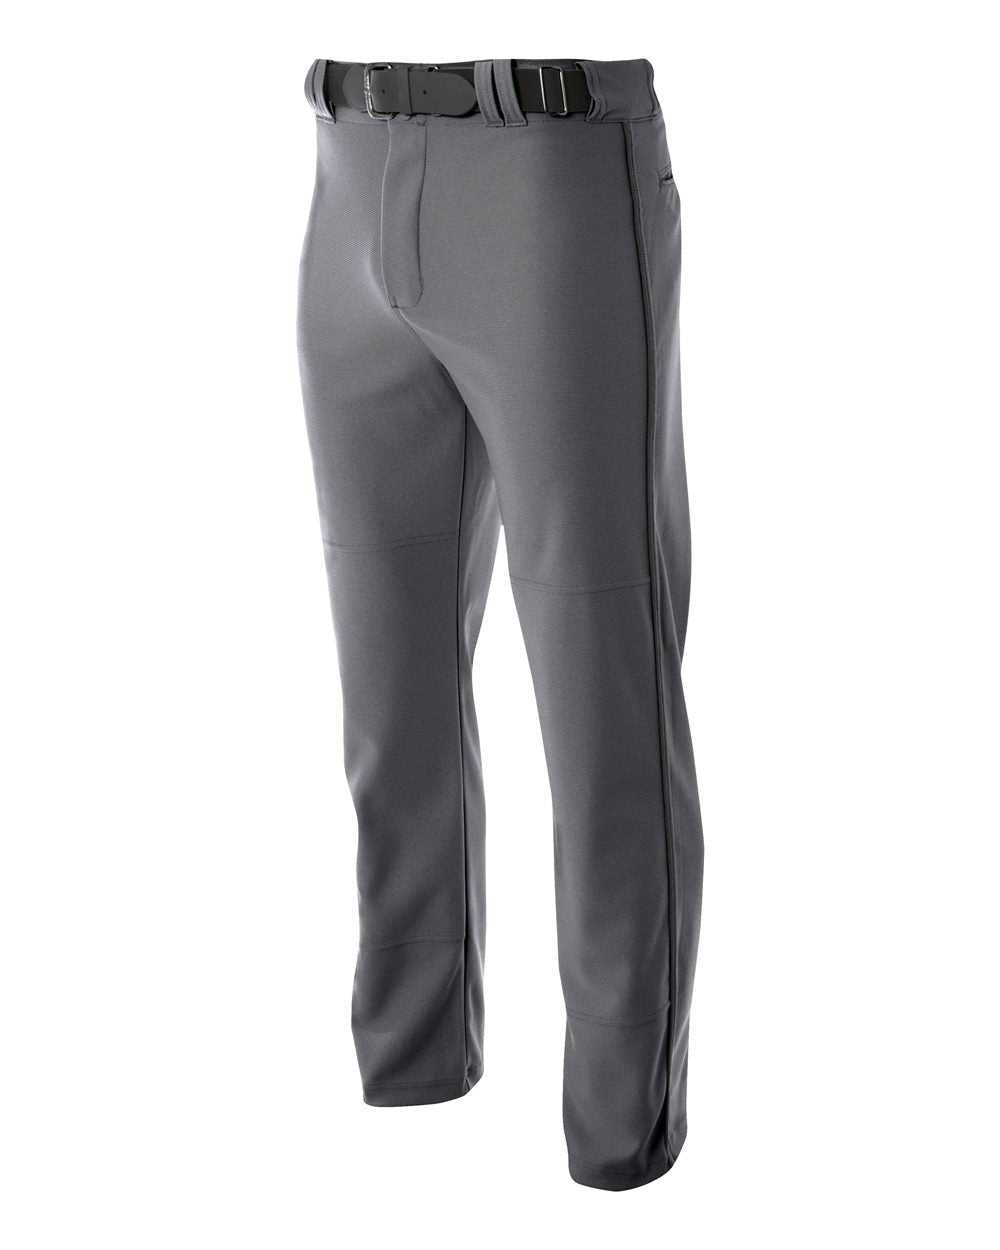 A4 NB6162 Youth Pro Style Open Bottom Baggy Cut Baseball Pant - Graphite - HIT a Double